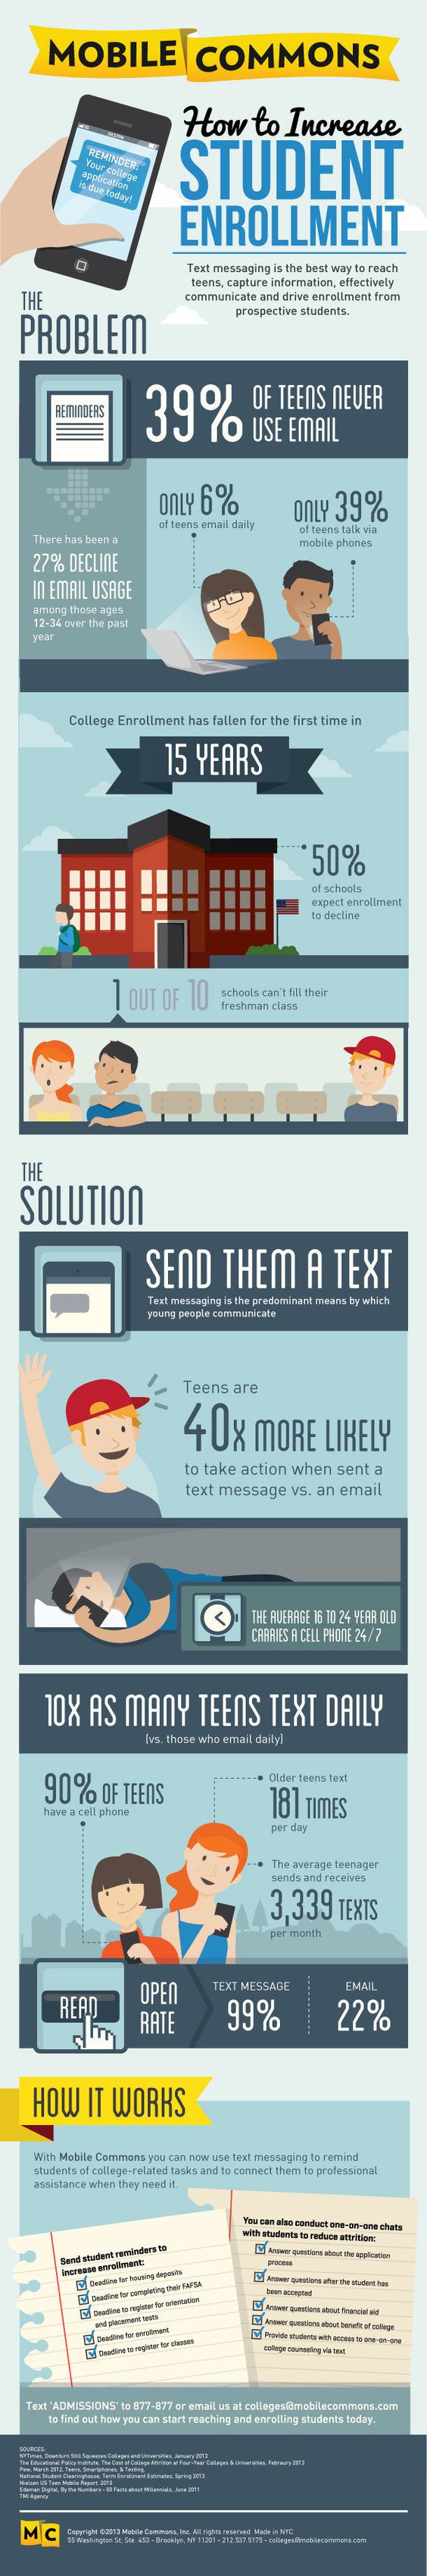 How to Increase Student Enrollment with Mobile - Infographic